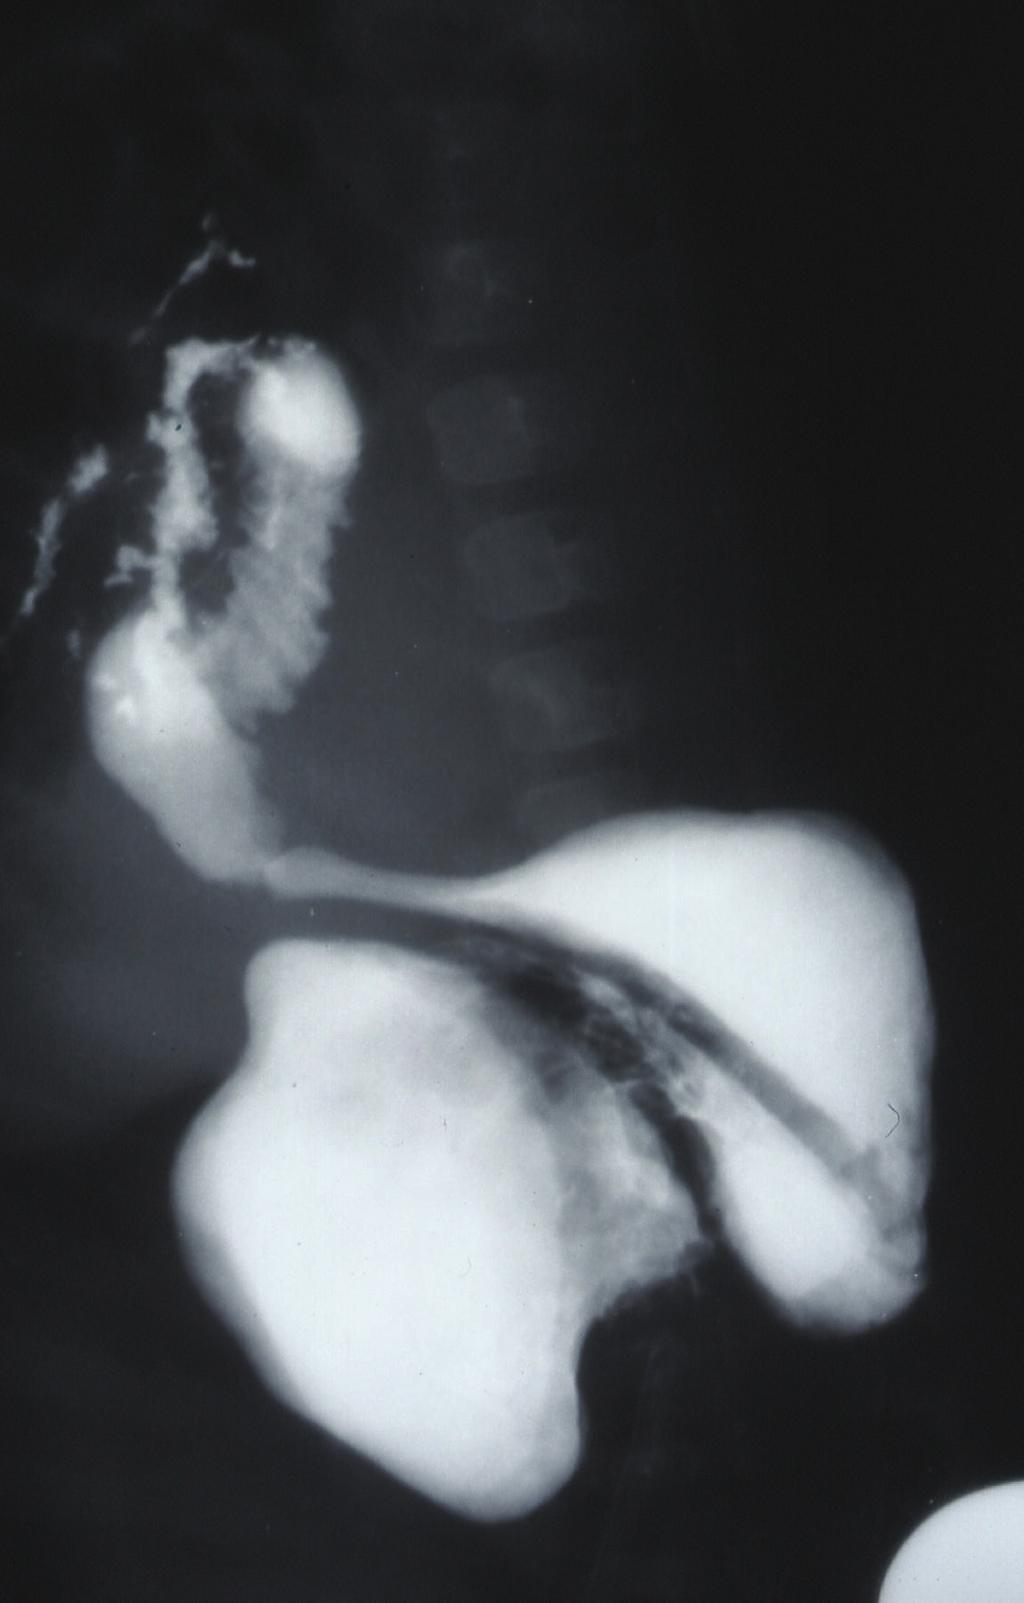 ISRN Surgery 3 (a) Figure 1: Barium meal showing a large paraesophageal hernia with herniation of the stomach into the chest and intrathoracic gastric volvolus.